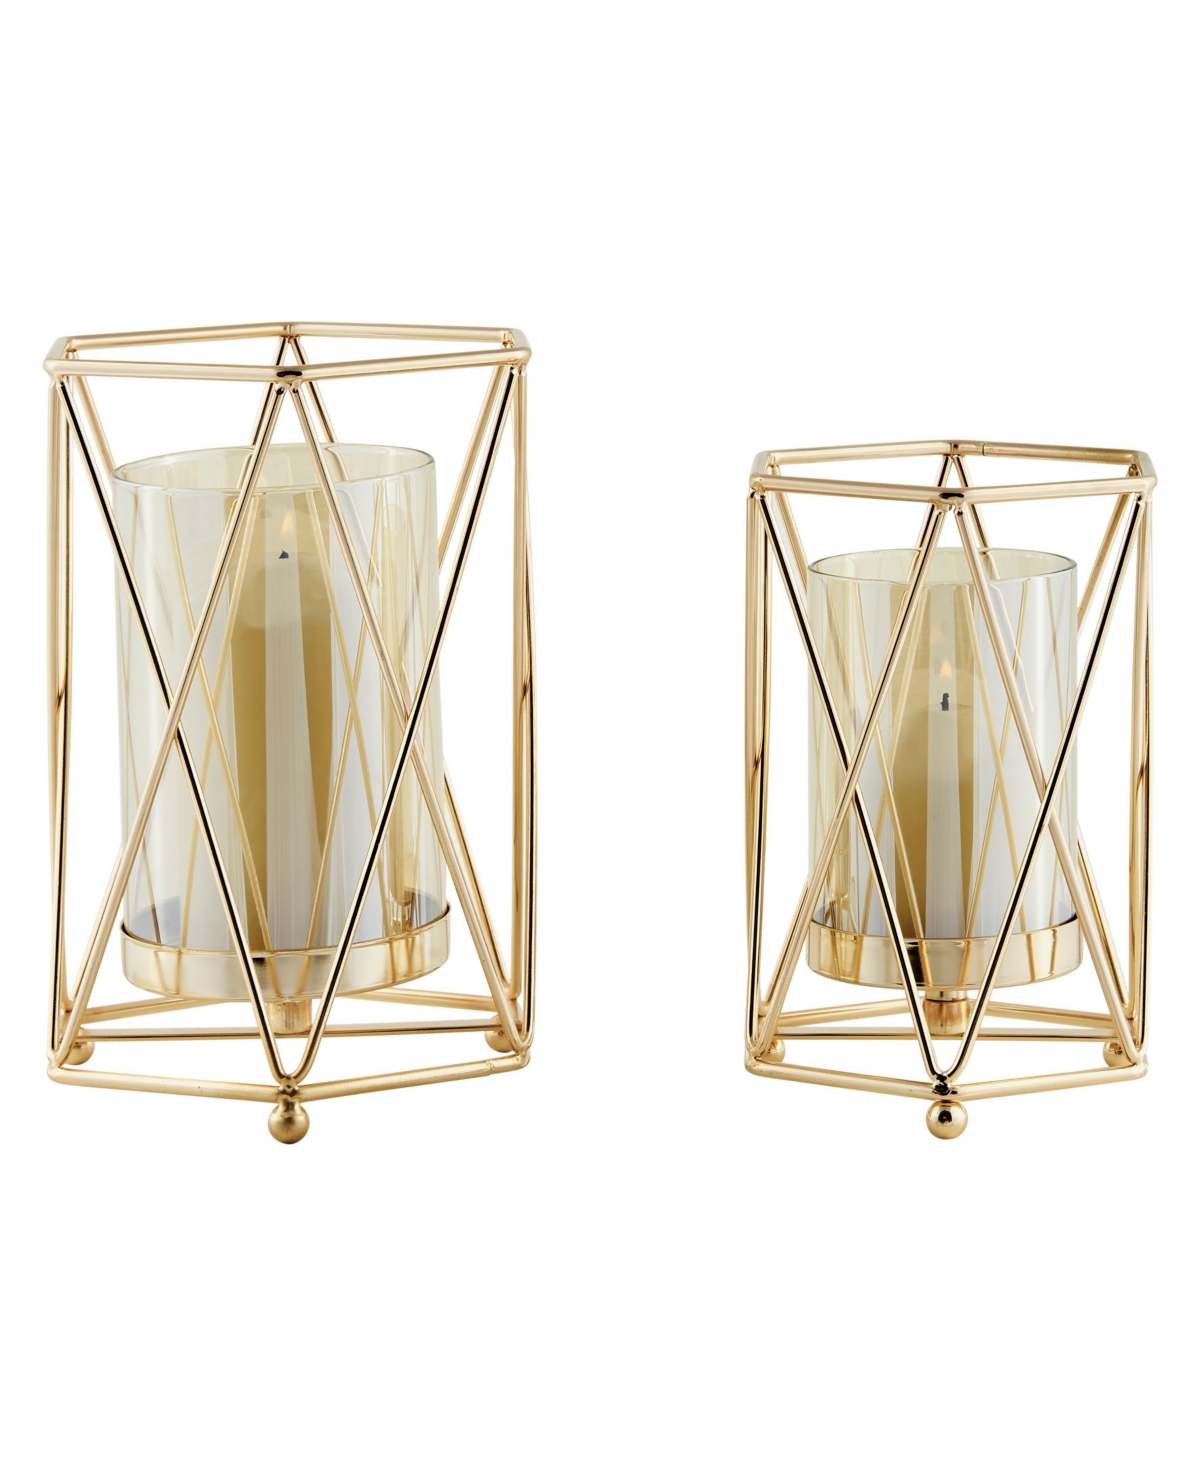 Danya B Prism Warm Hurricane 2-piece Candle Holders Set In Gold